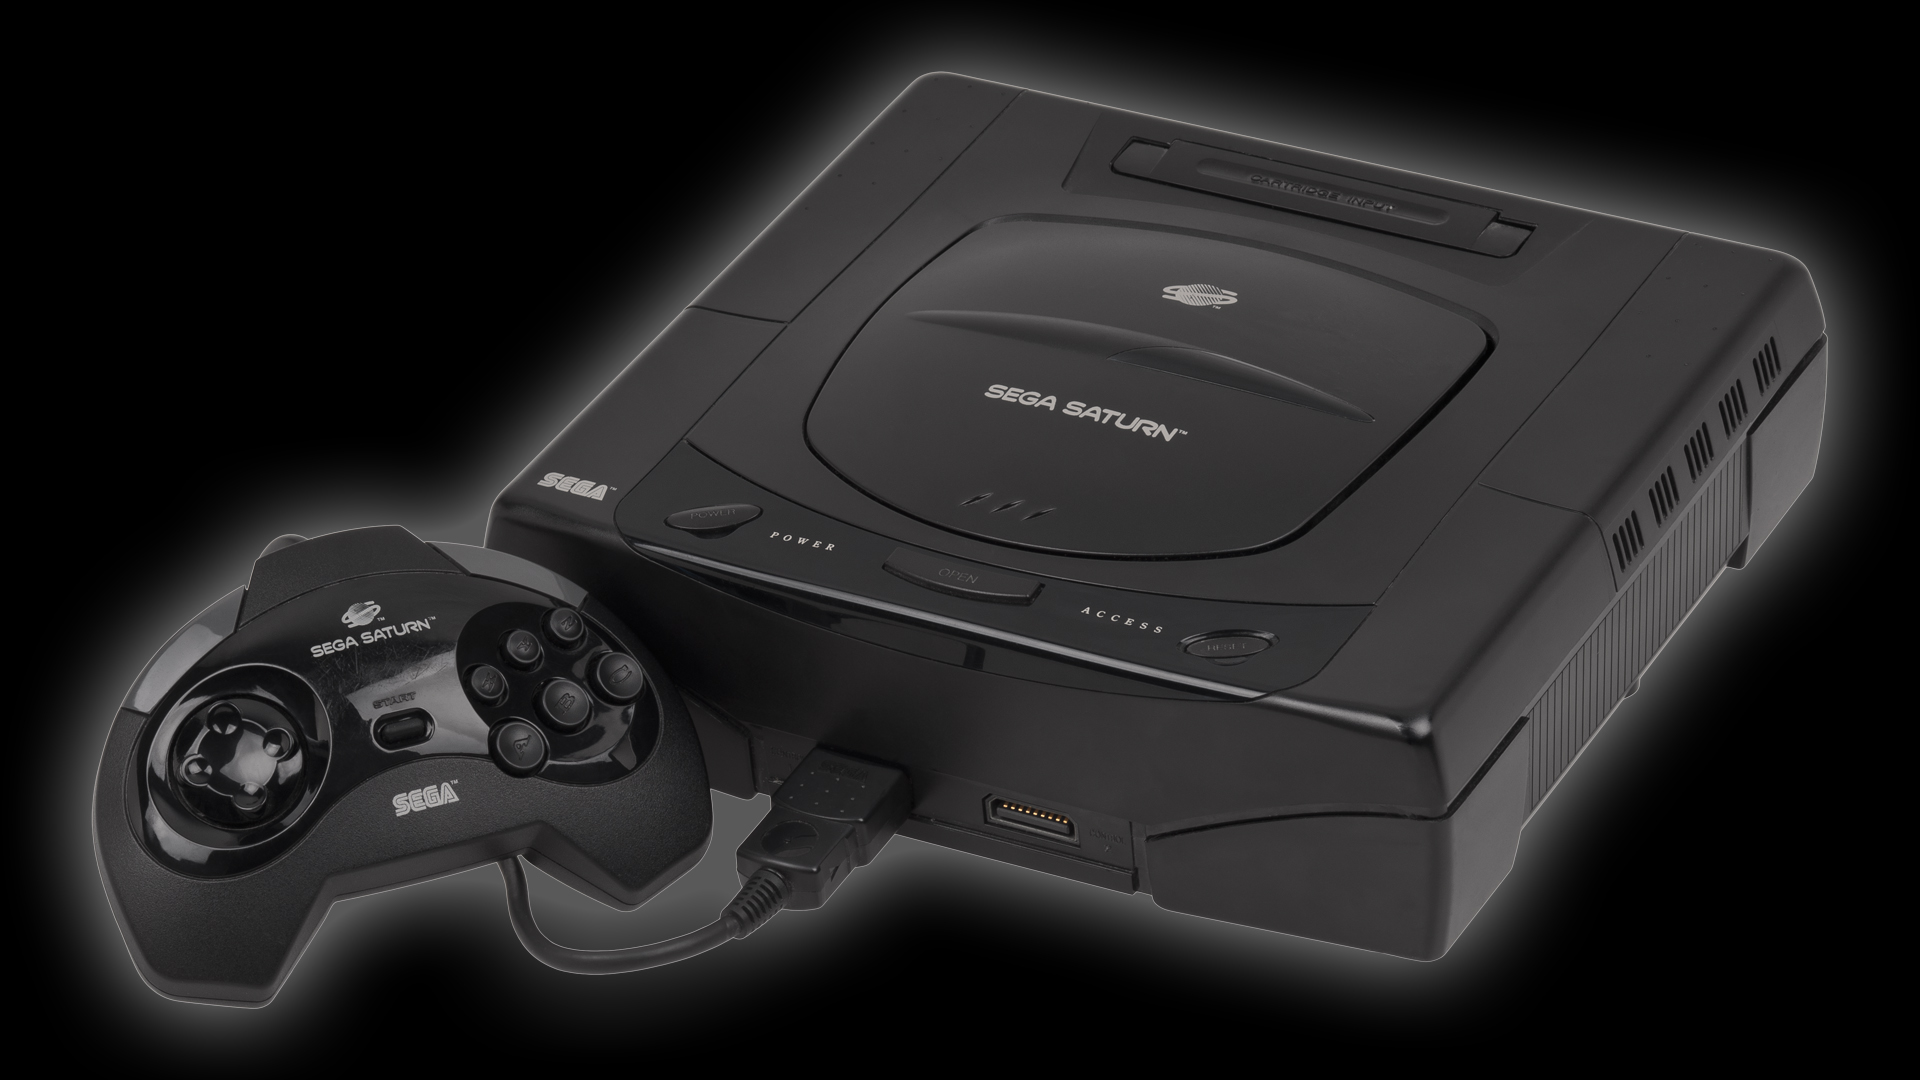 You are currently viewing دانلود تمام بازی های کنسول سگا ساترن Sega Saturn CHD rom collection رام کلکسیون کامل